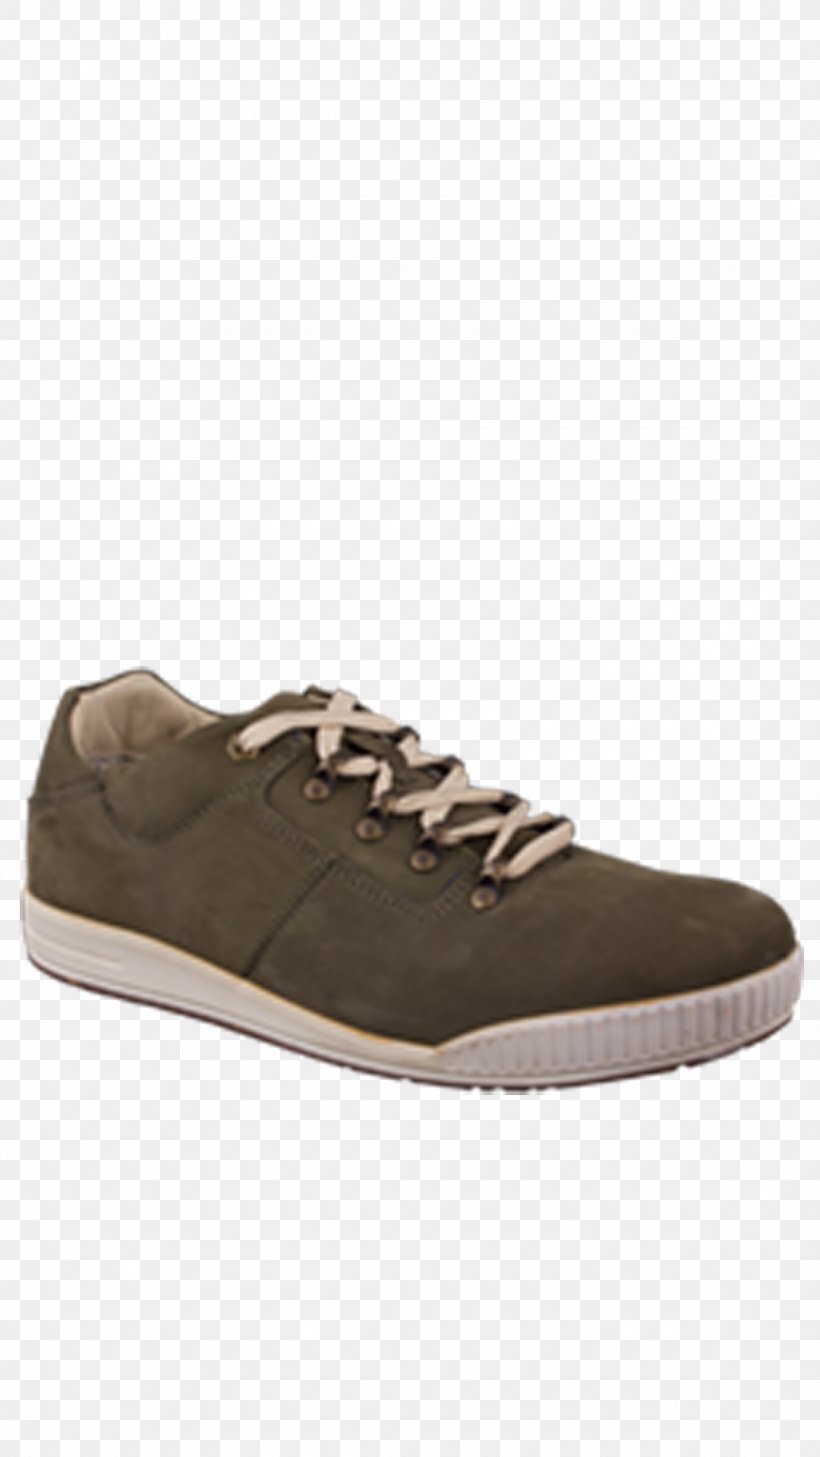 Sports Shoes Green Casual Wear Online Shopping, PNG, 1080x1920px, Sports Shoes, Artificial Leather, Beige, Brown, Casual Wear Download Free